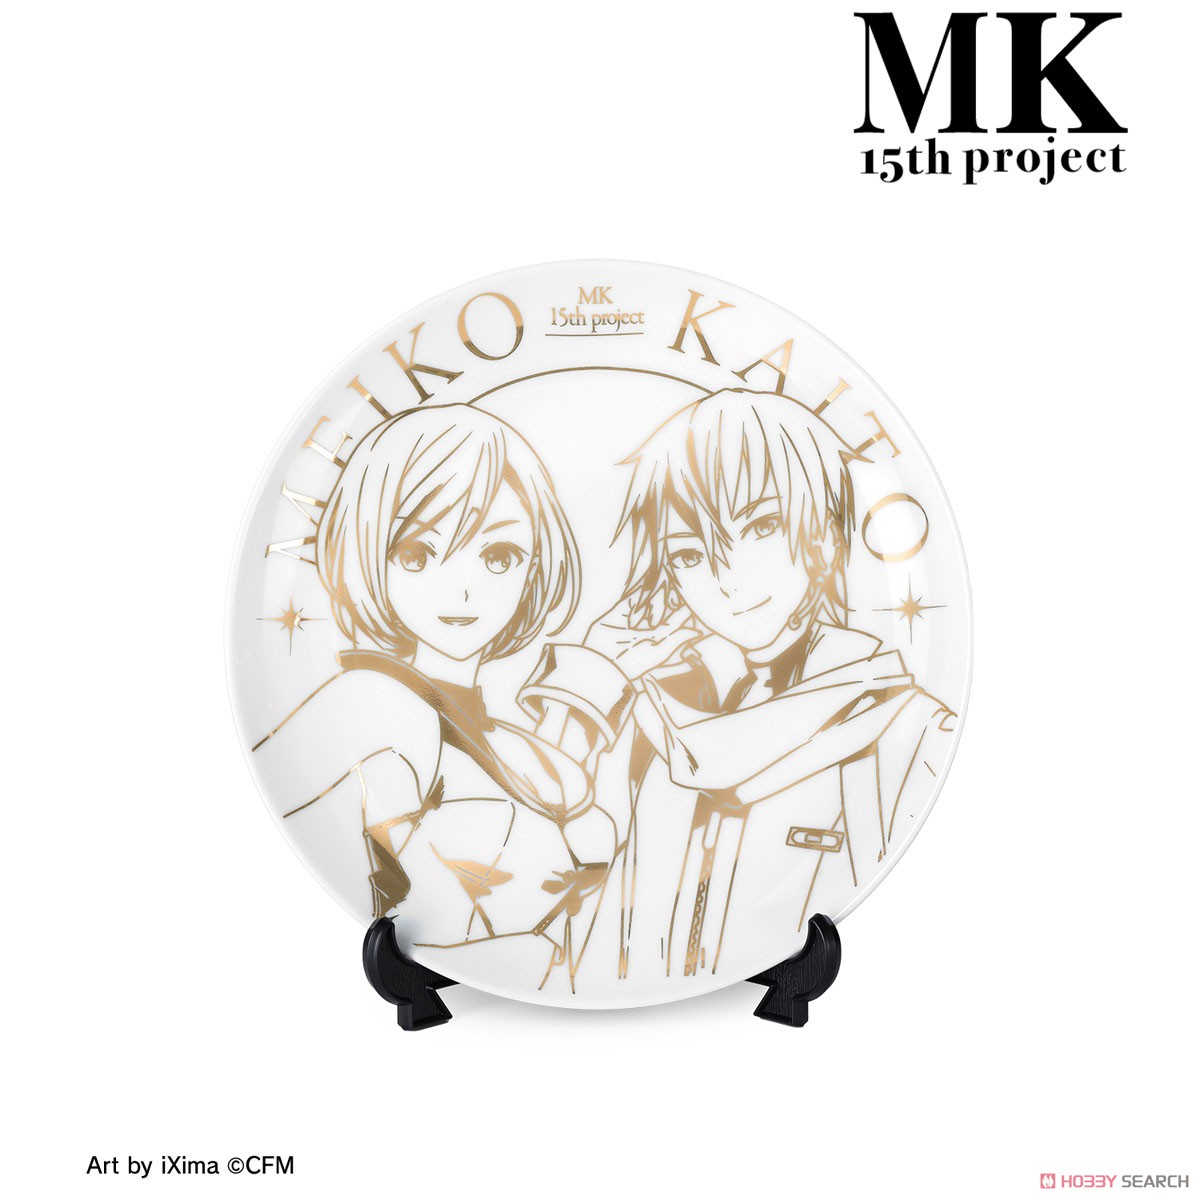 MK15th project MK15th project MEIKO＆KAITO オンラインコンサート開催記念 箔プリントプレート (キャラクターグッズ) 商品画像1